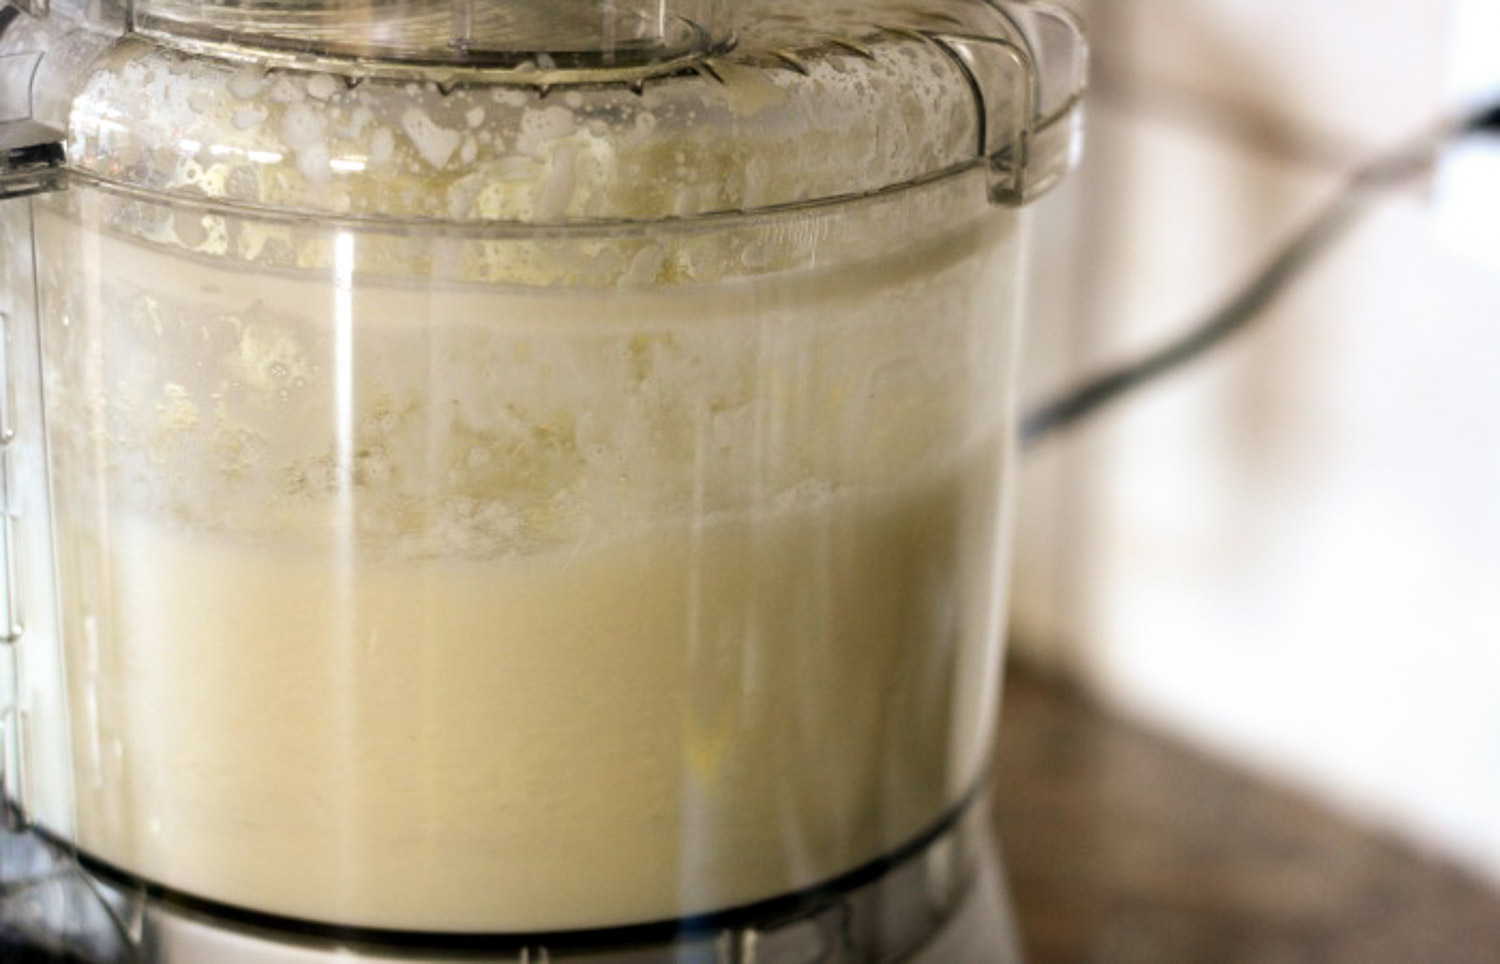 A food processor with cream in it after it has been run.